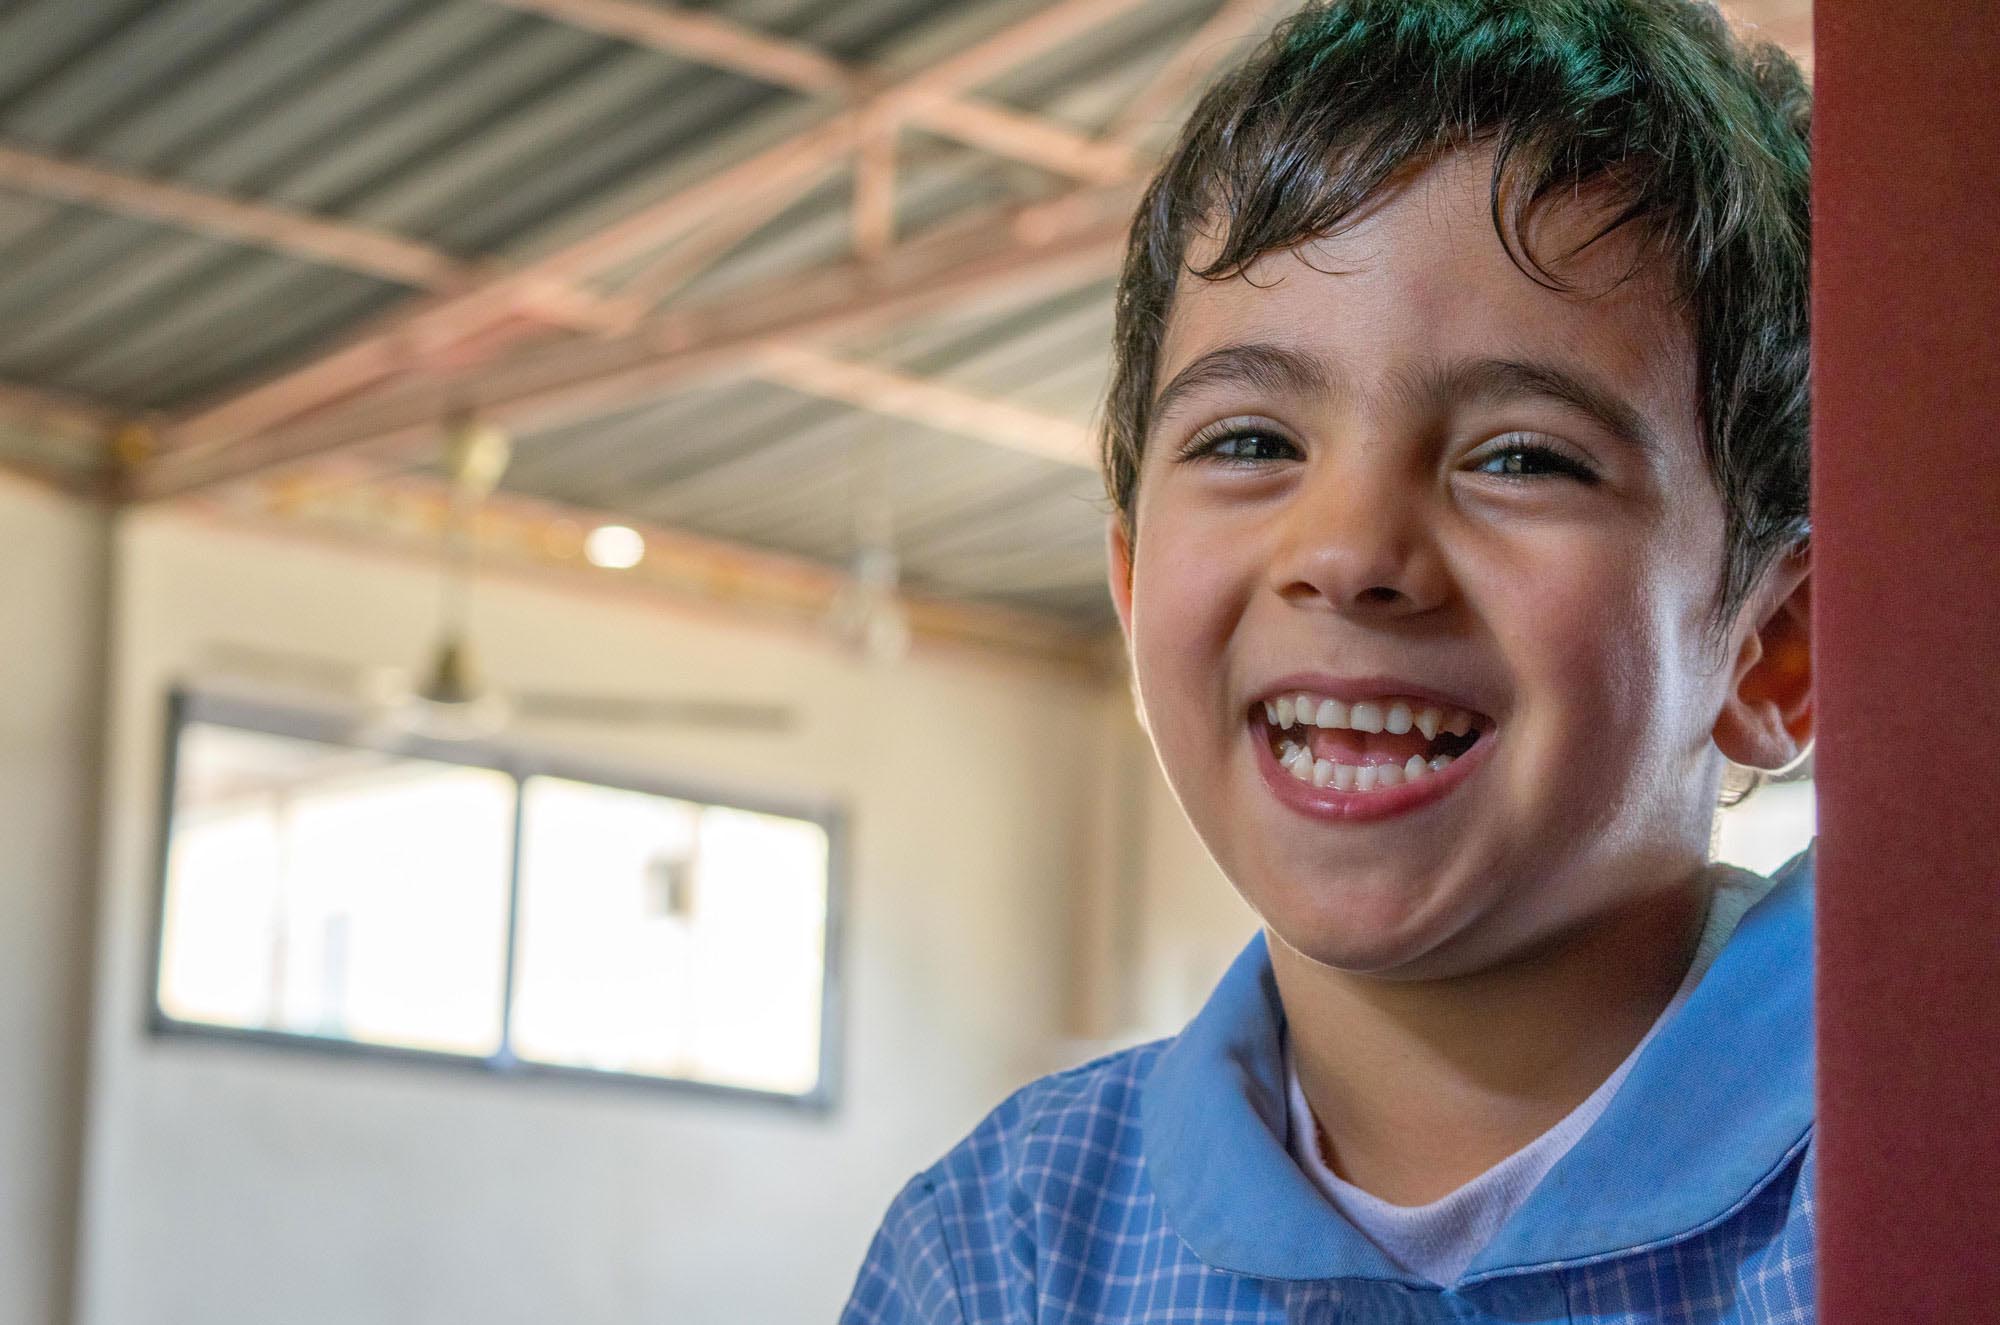 Anera works in Lebanon camps to renovate preschools and improve education.